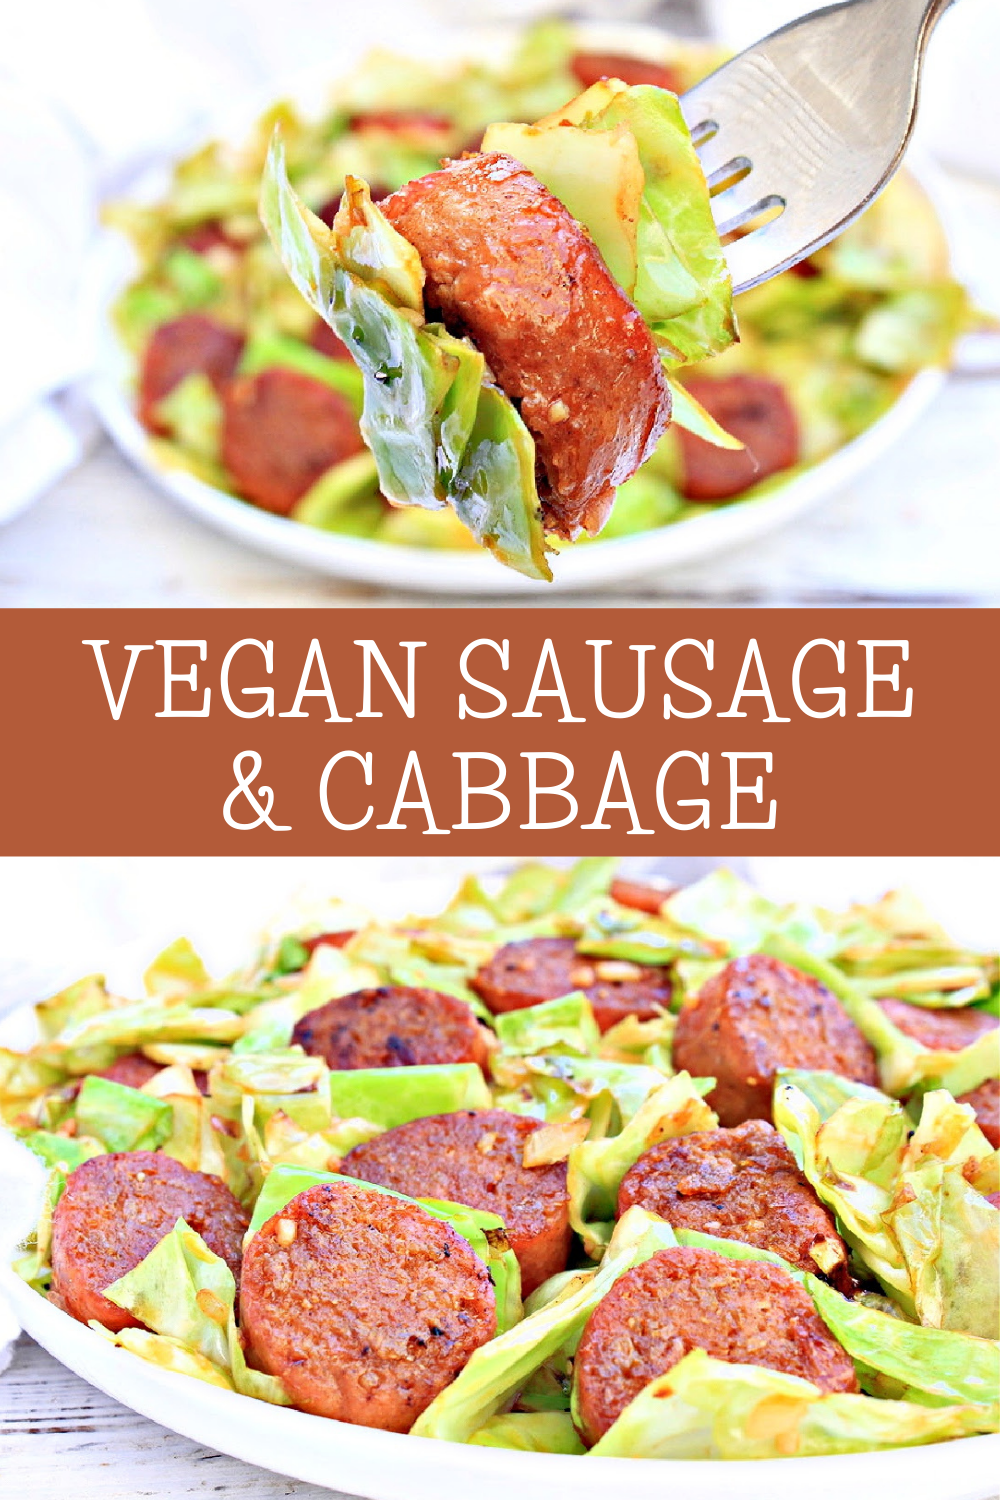 Cabbage and Sausage ~ SImple ingredients deliver big flavors in this easy one-skillet meal! Ready to serve in 15 minutes! via @thiswifecooks